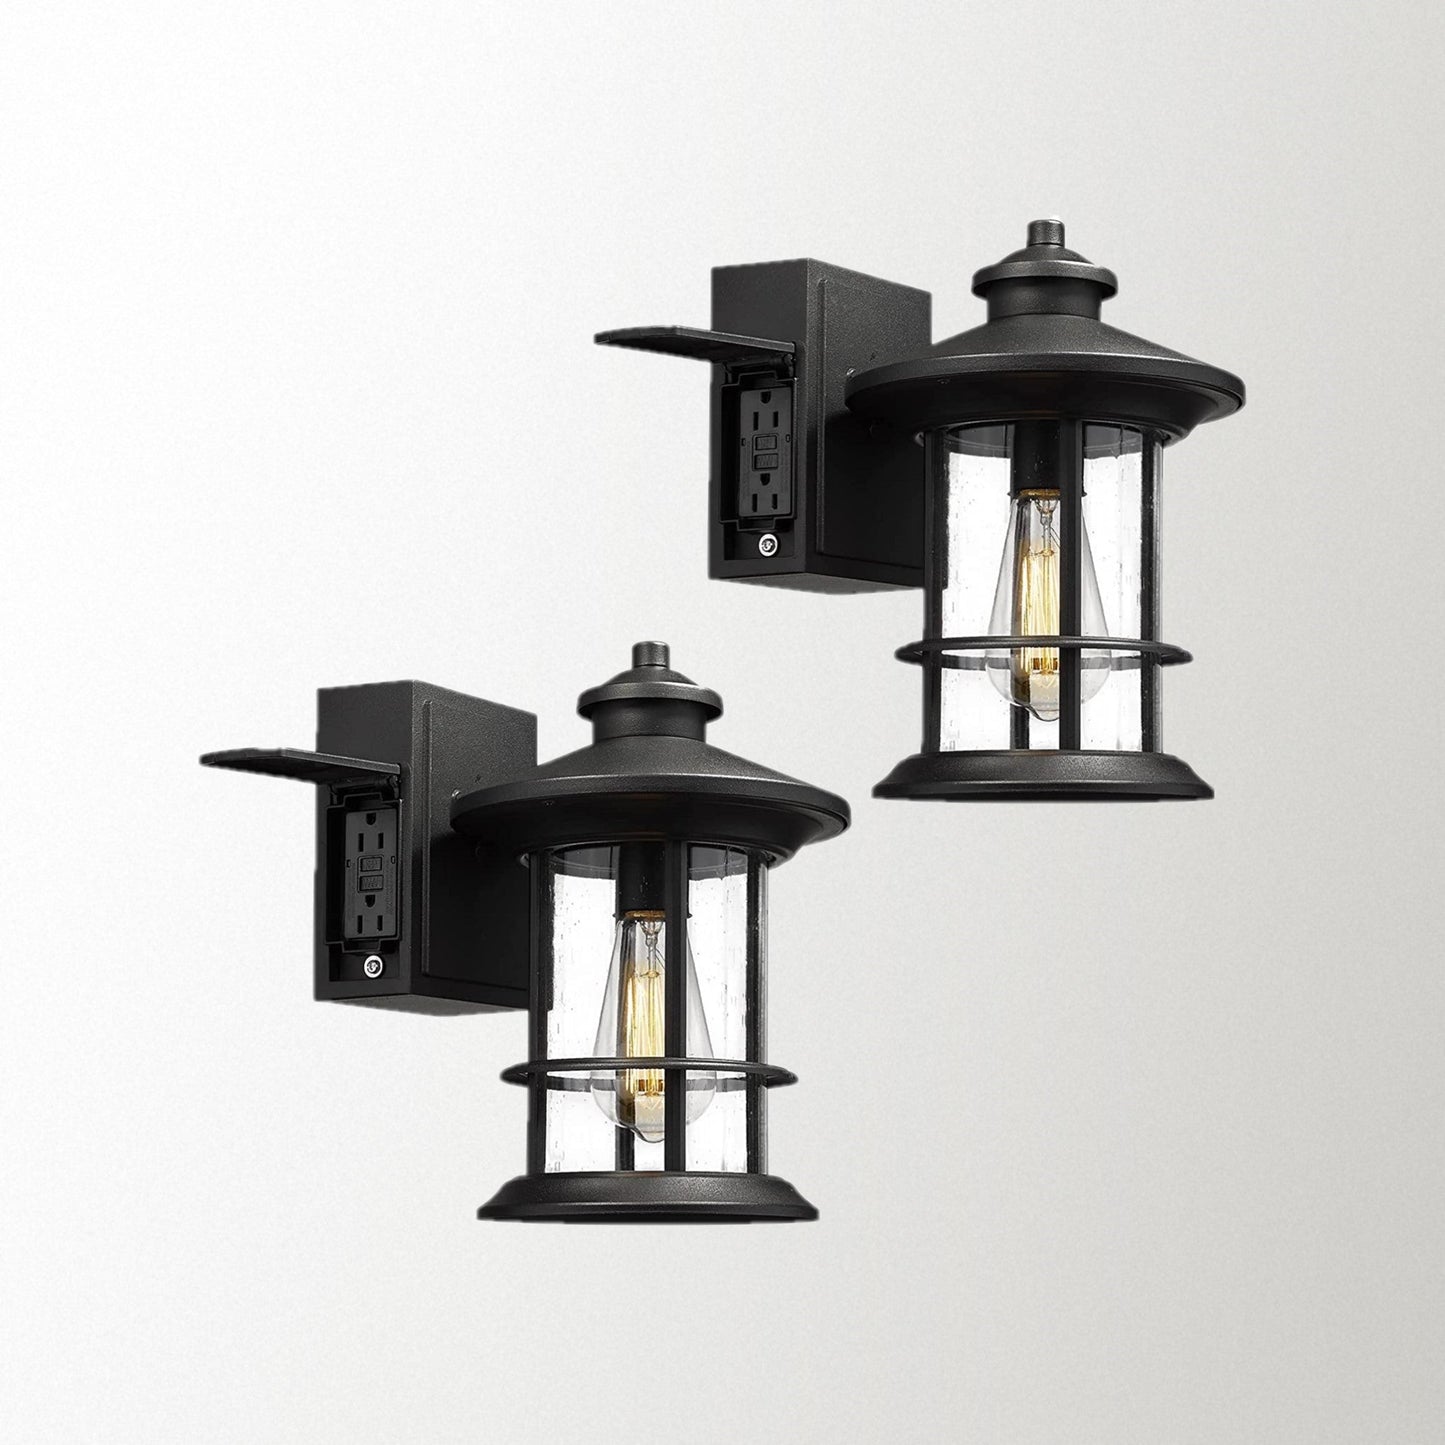 
                  
                    Emliviar 2 Pack Outdoor Wall Lights with Built-in GFCI Outlet, Modern Farmhouse Outdoor Porch Lights, Seeded Glass in Black Finish,WE248B-G-2PK BK
                  
                